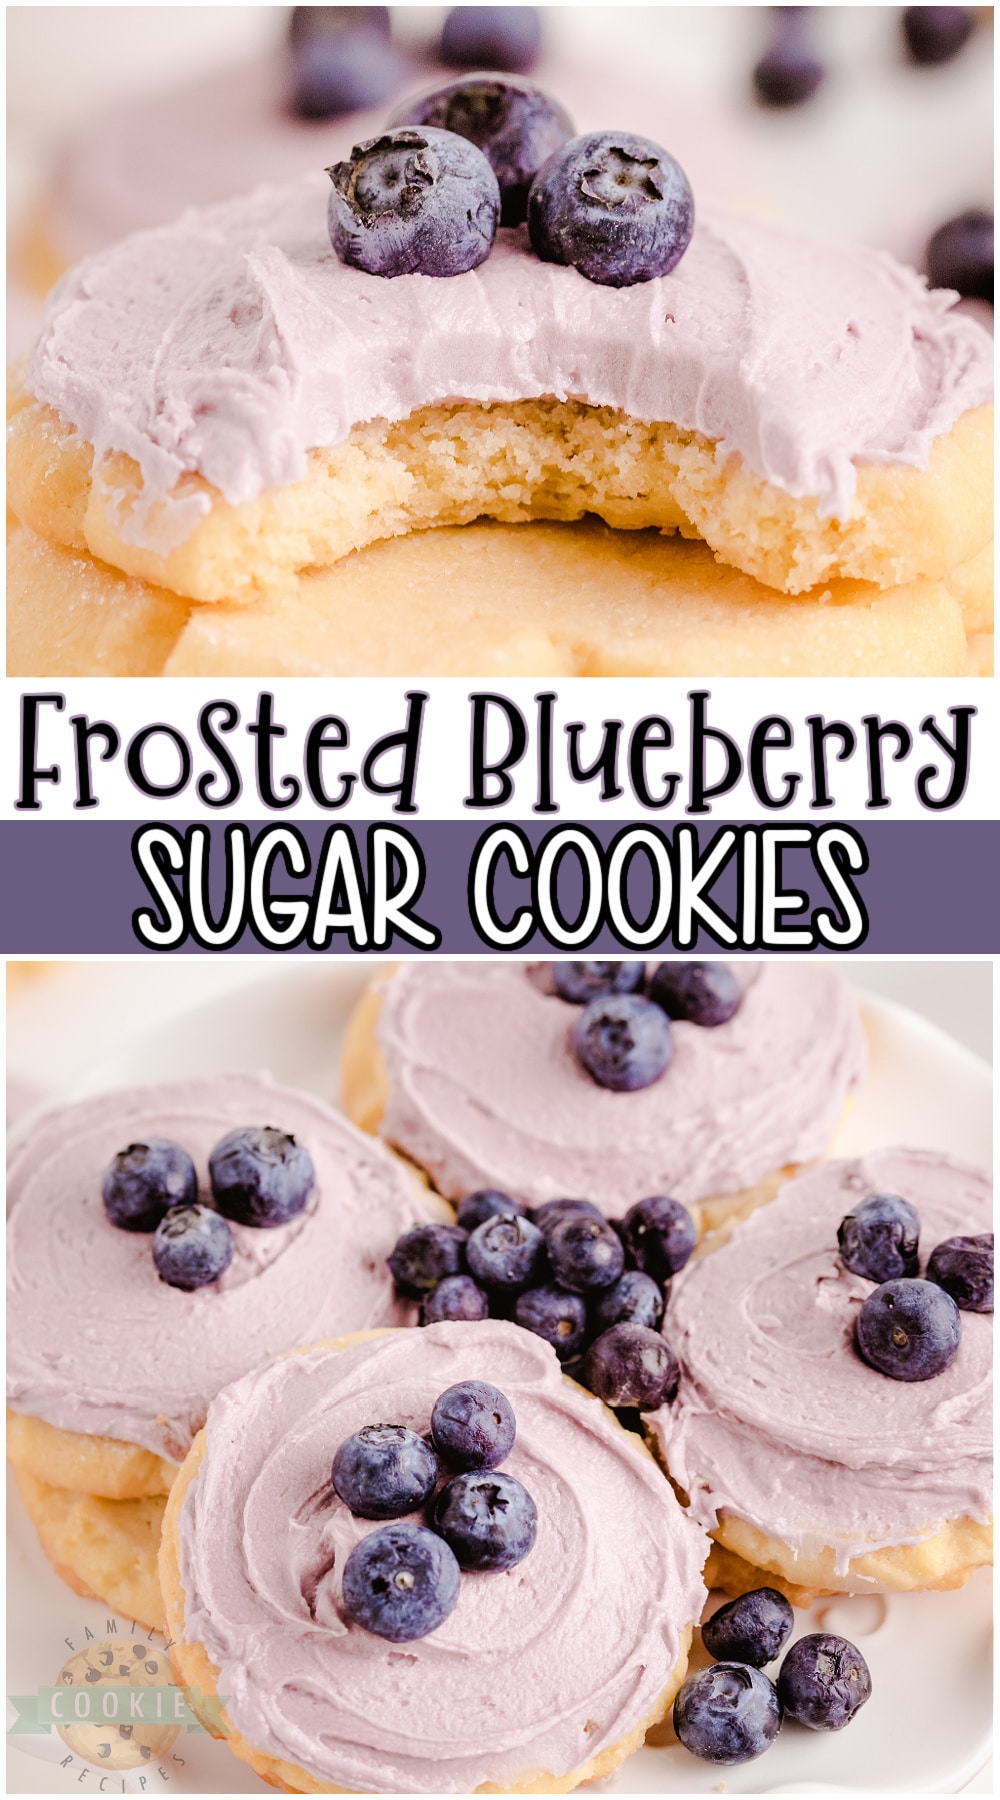 Blueberry sugar cookies made with a soft, vanilla cookie dough & an absolutely delightful blueberry buttercream frosting on top! Frosted sugar cookie with blueberries perfect for any occasion! #cookies #blueberry #sugarcookies #baking #easyrecipe from FAMILY COOKIE RECIPES via @buttergirls